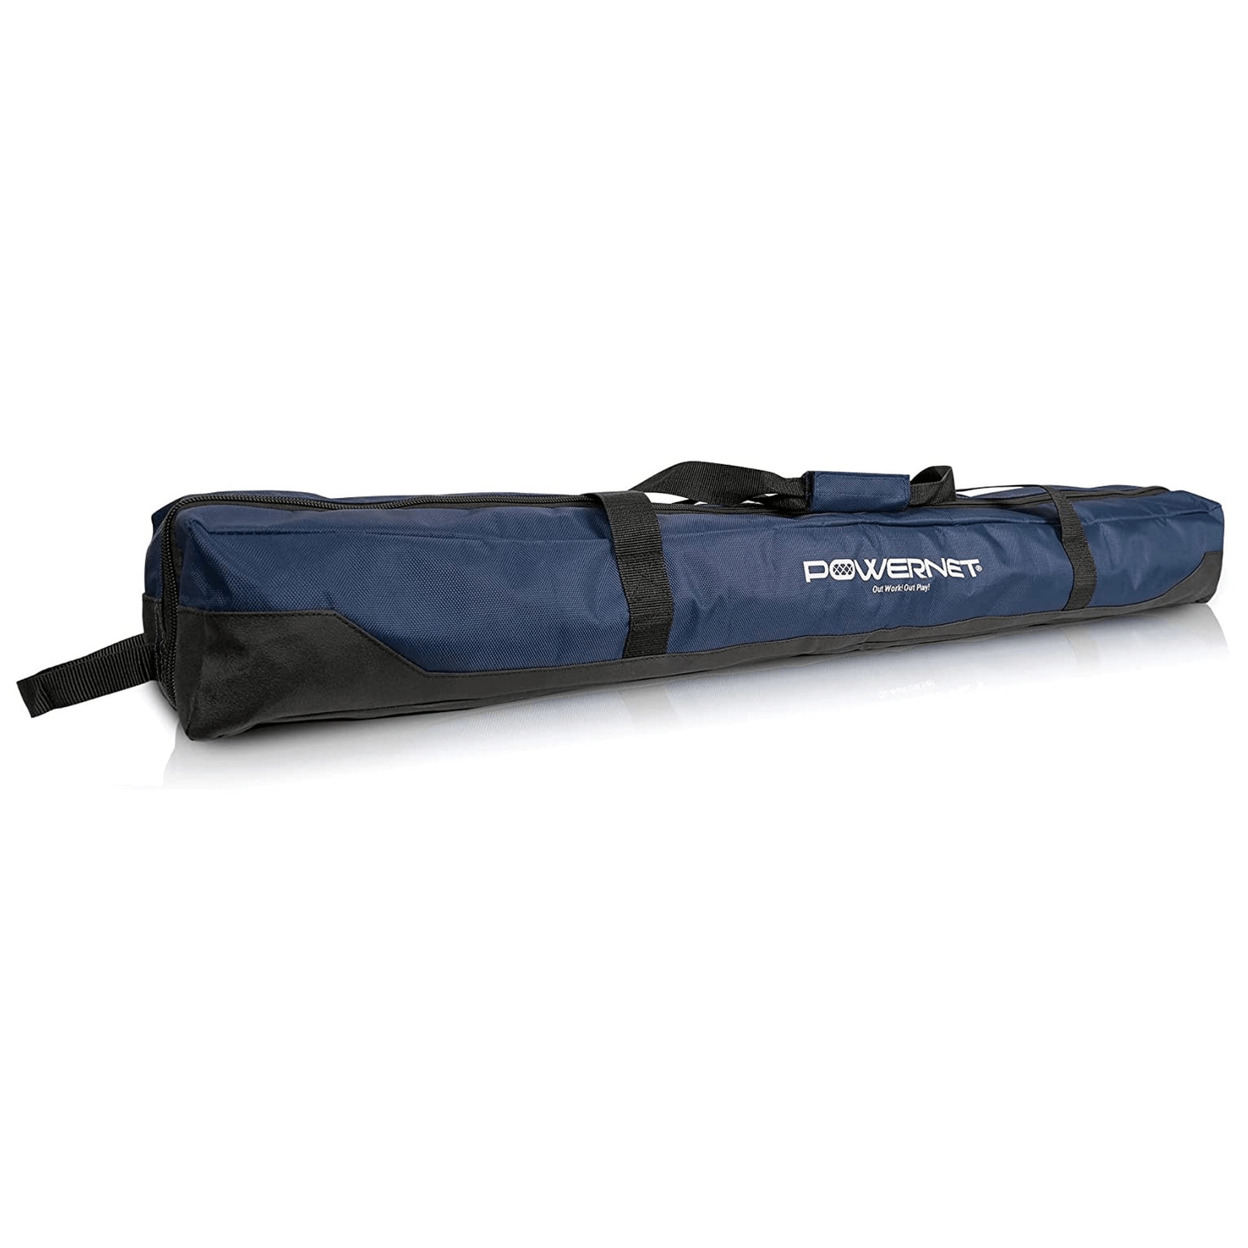 PowerNet Deluxe Replacement Carry Bag For 7x7 Baseball Softball Hitting Net (Bag Only) - Navy Blue